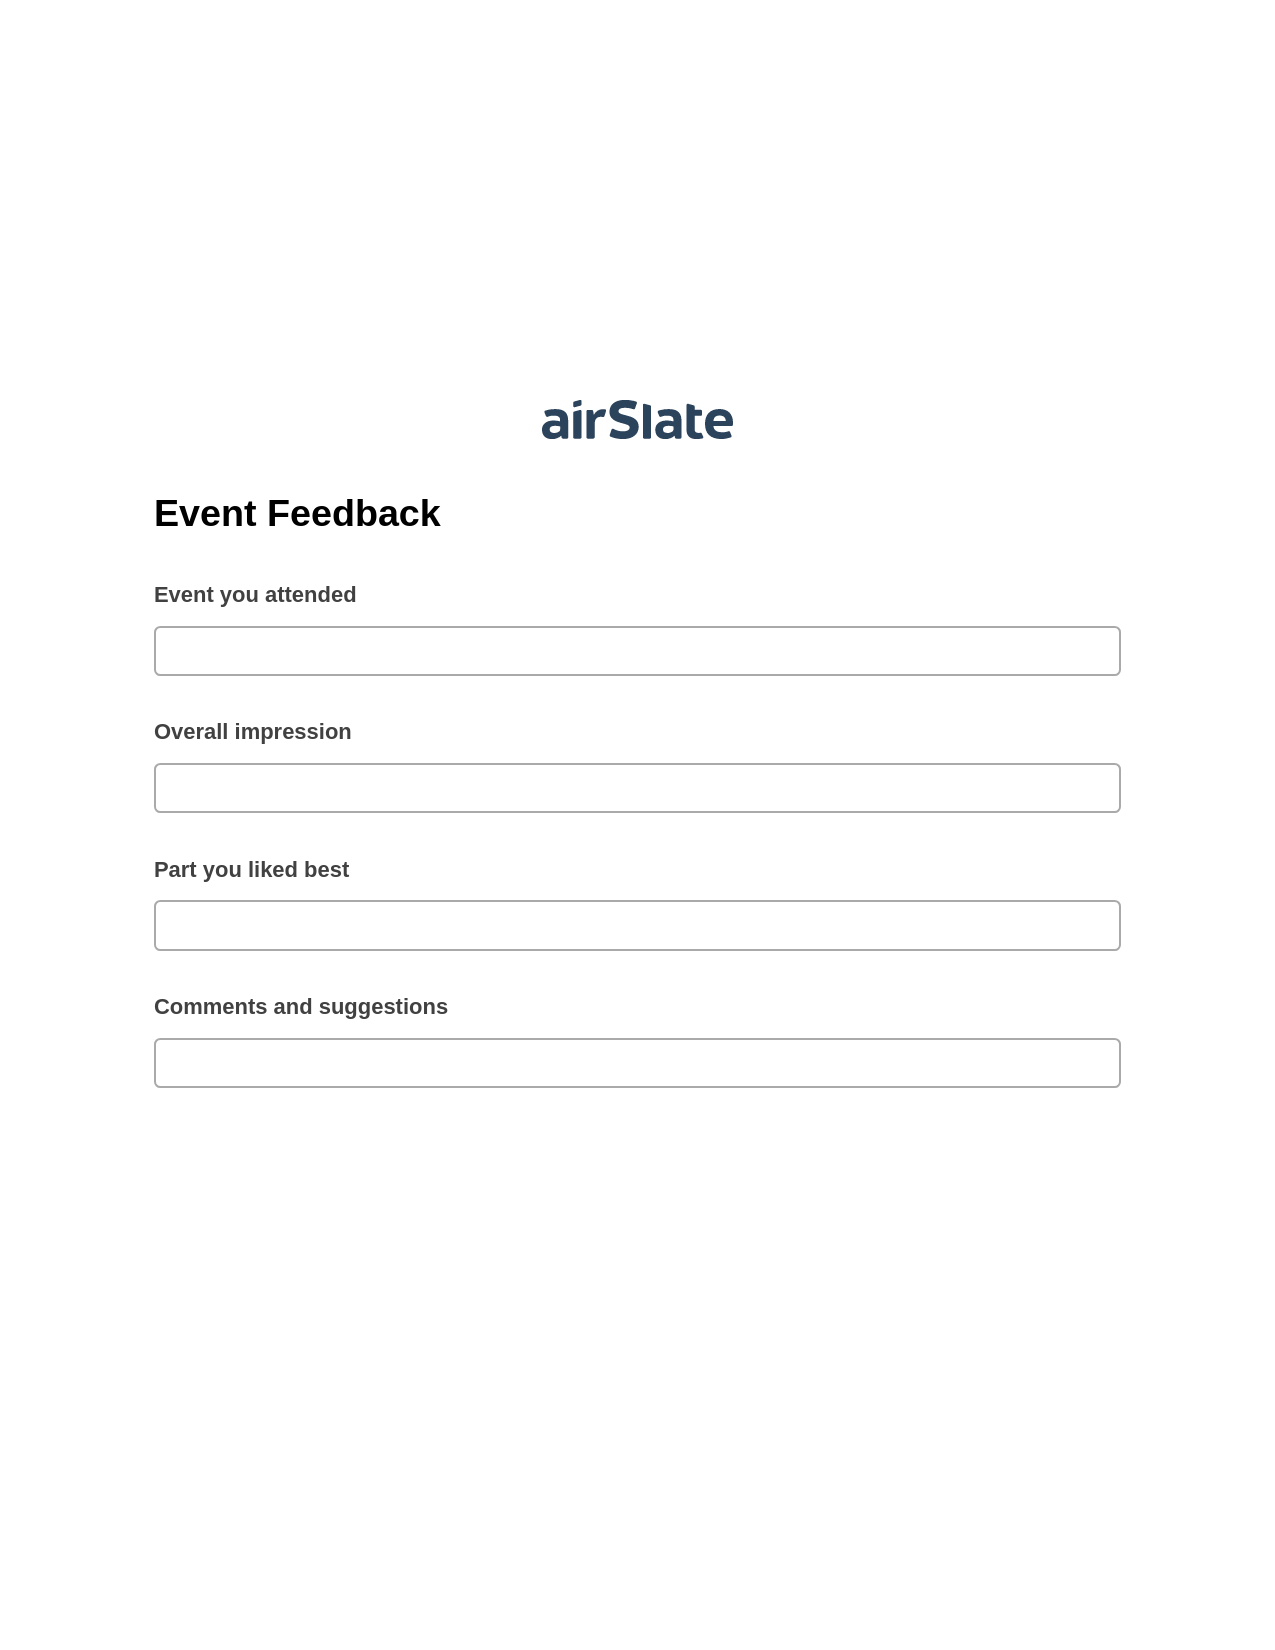 Multirole Event Feedback Pre-fill Slate from MS Dynamics 365 Records Bot, Unassign Role Bot, Archive to SharePoint Folder Bot